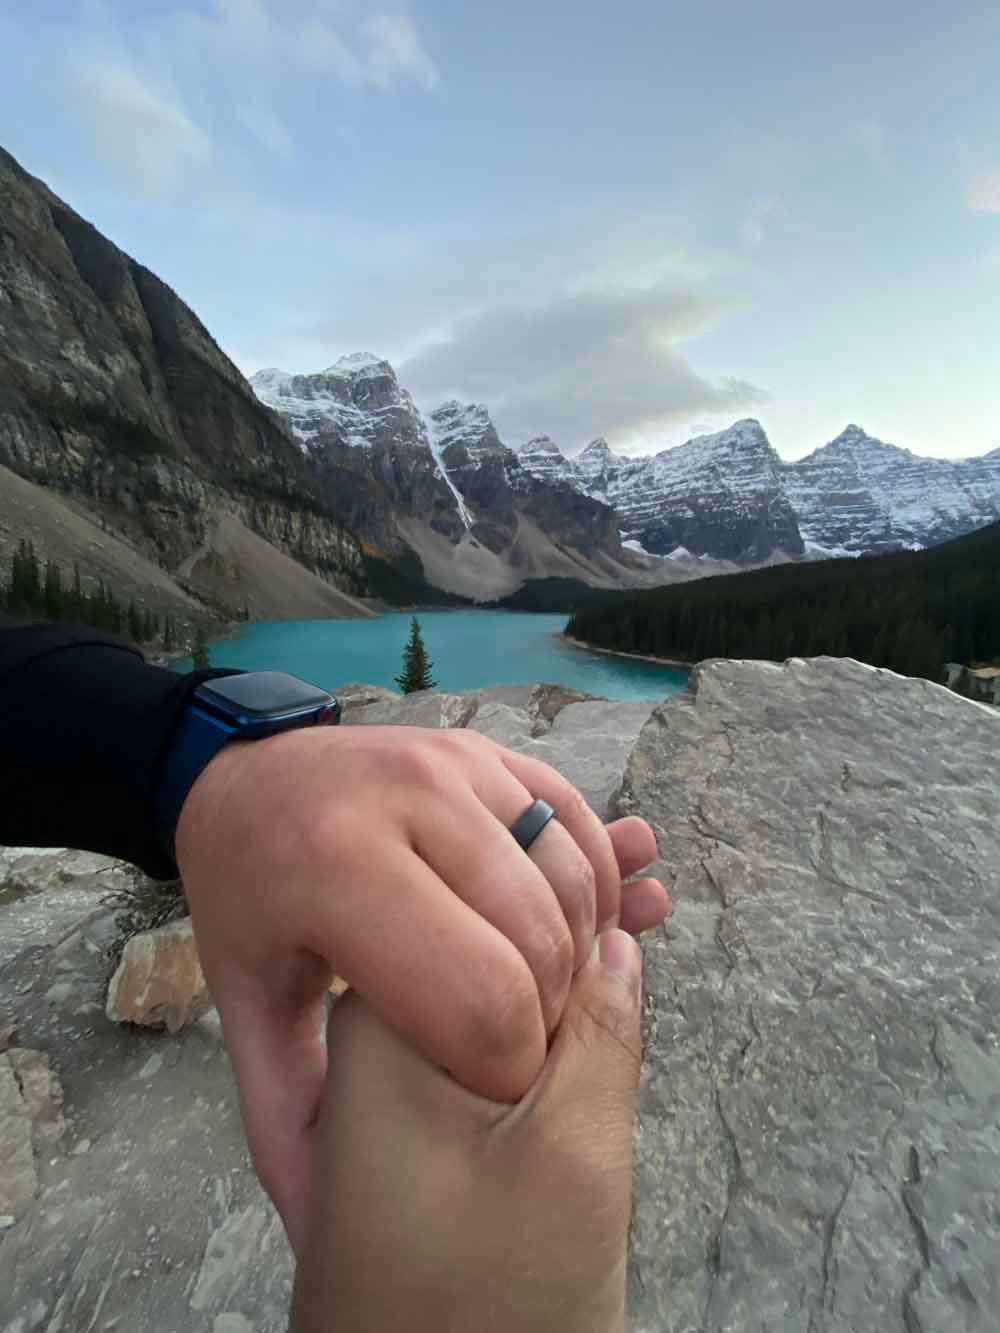 The couple got engaged at Moraine Lake in the Rocky Mountains. (Collect/PA Real Life)